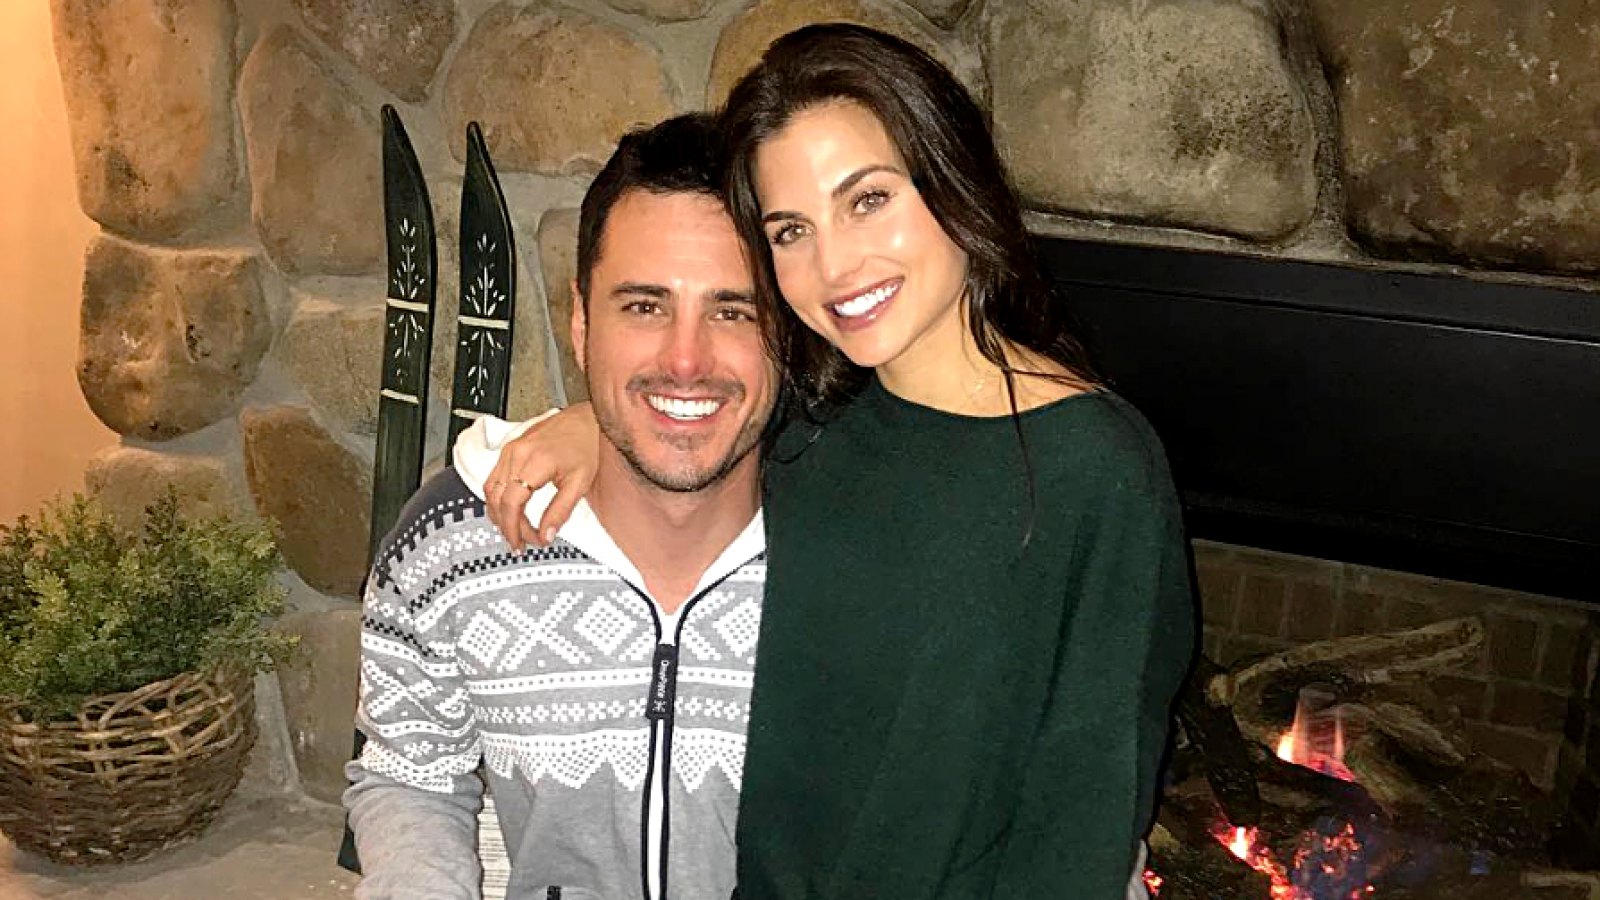 Bachelor Nation's Ben Higgins Gushes About His ’Unexpected’ Relationship